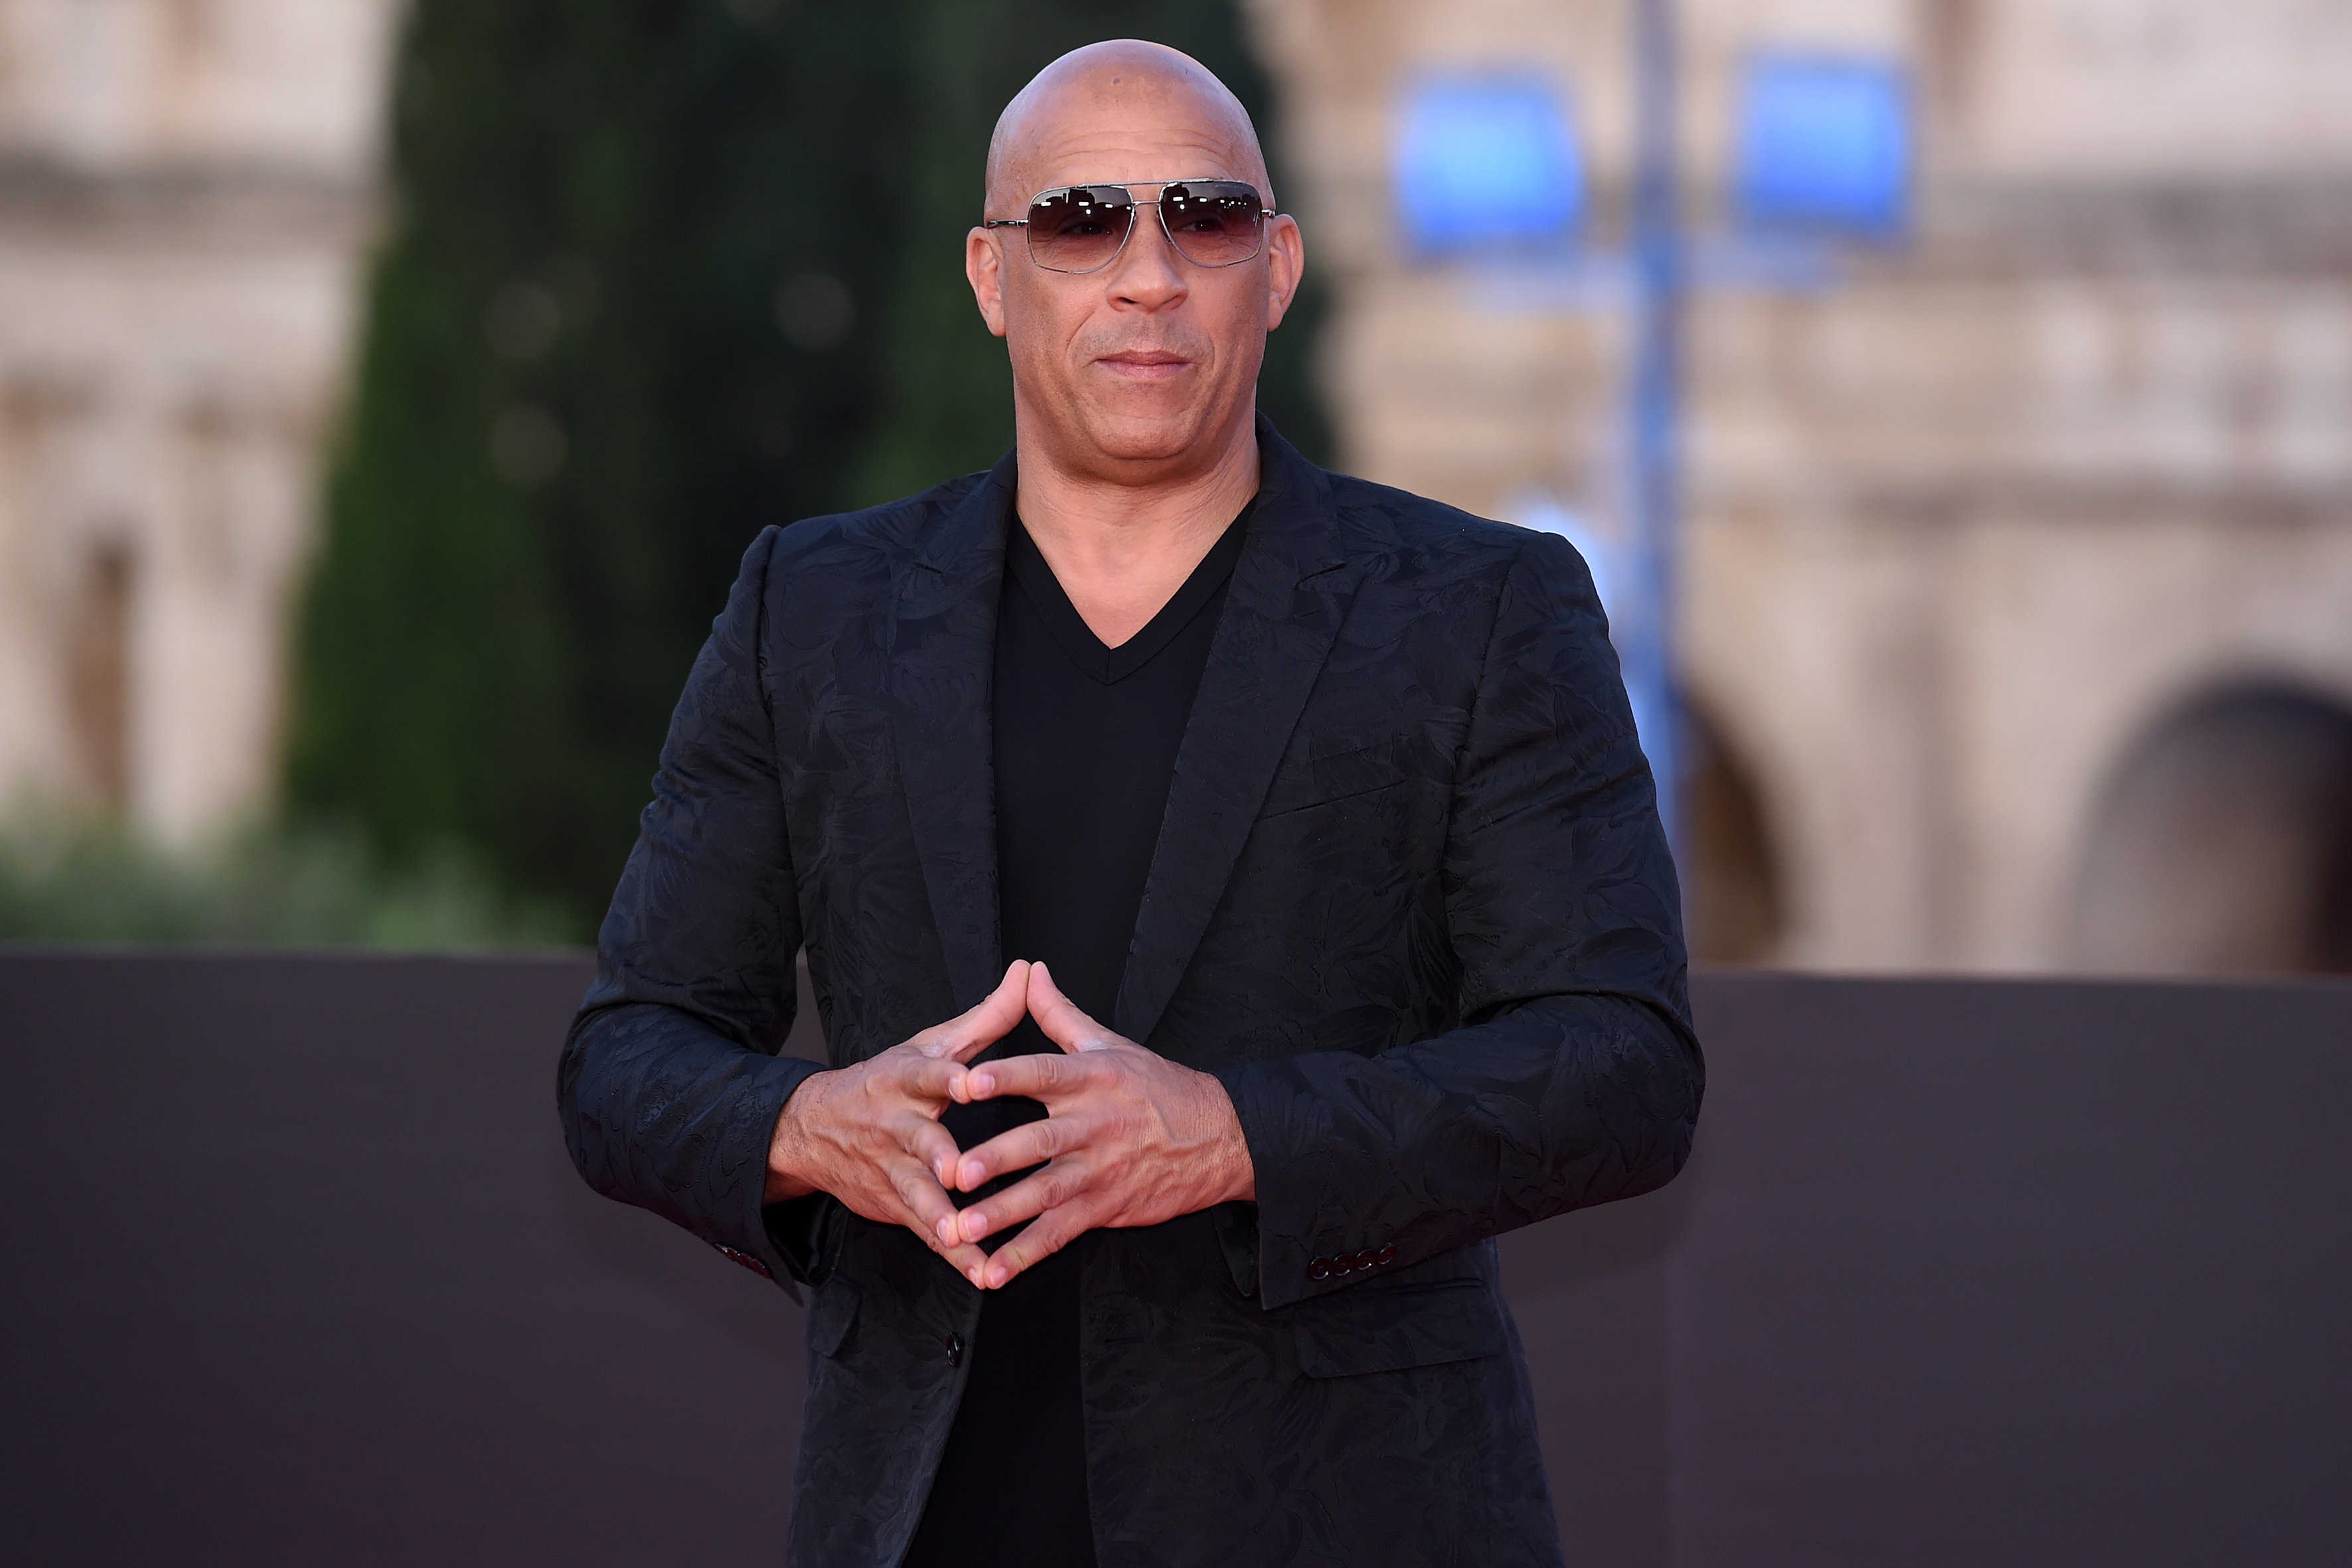 Vin Diesel is on the red carpet at the world premiere of the film Fast X at the Colosseum in Rome, Italy on May 12, 2023